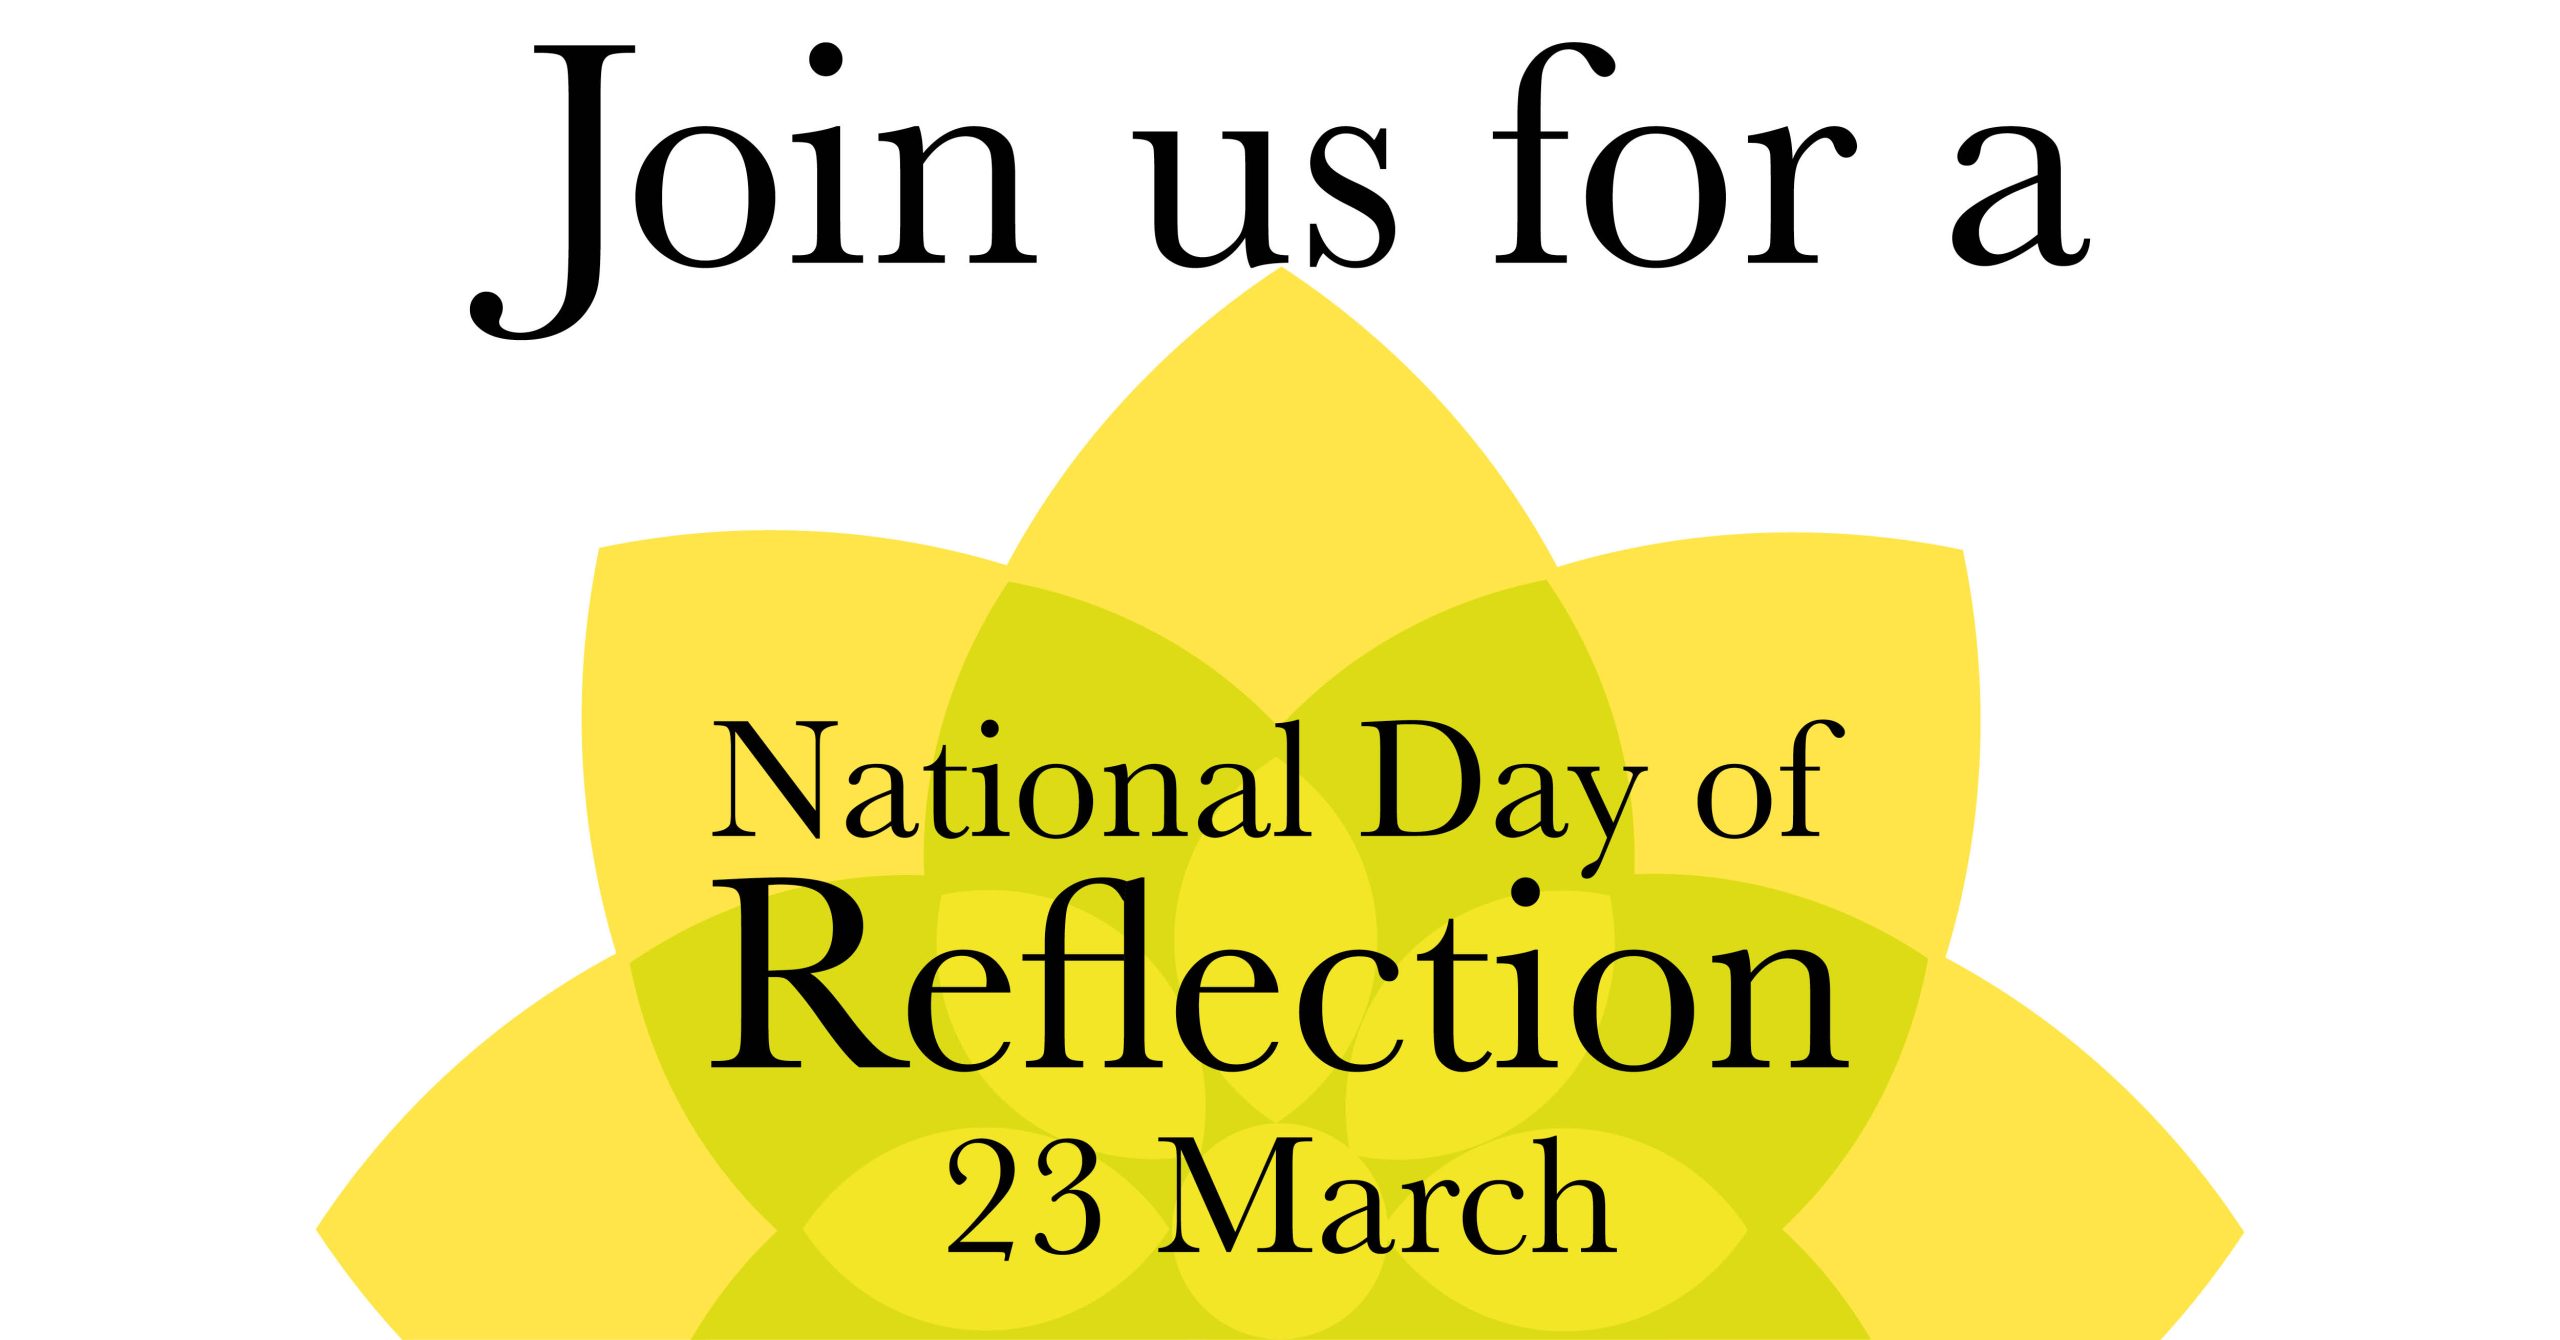 Join us for a National Day of Reflection 23 March over a series of yellow interlocking leaves.